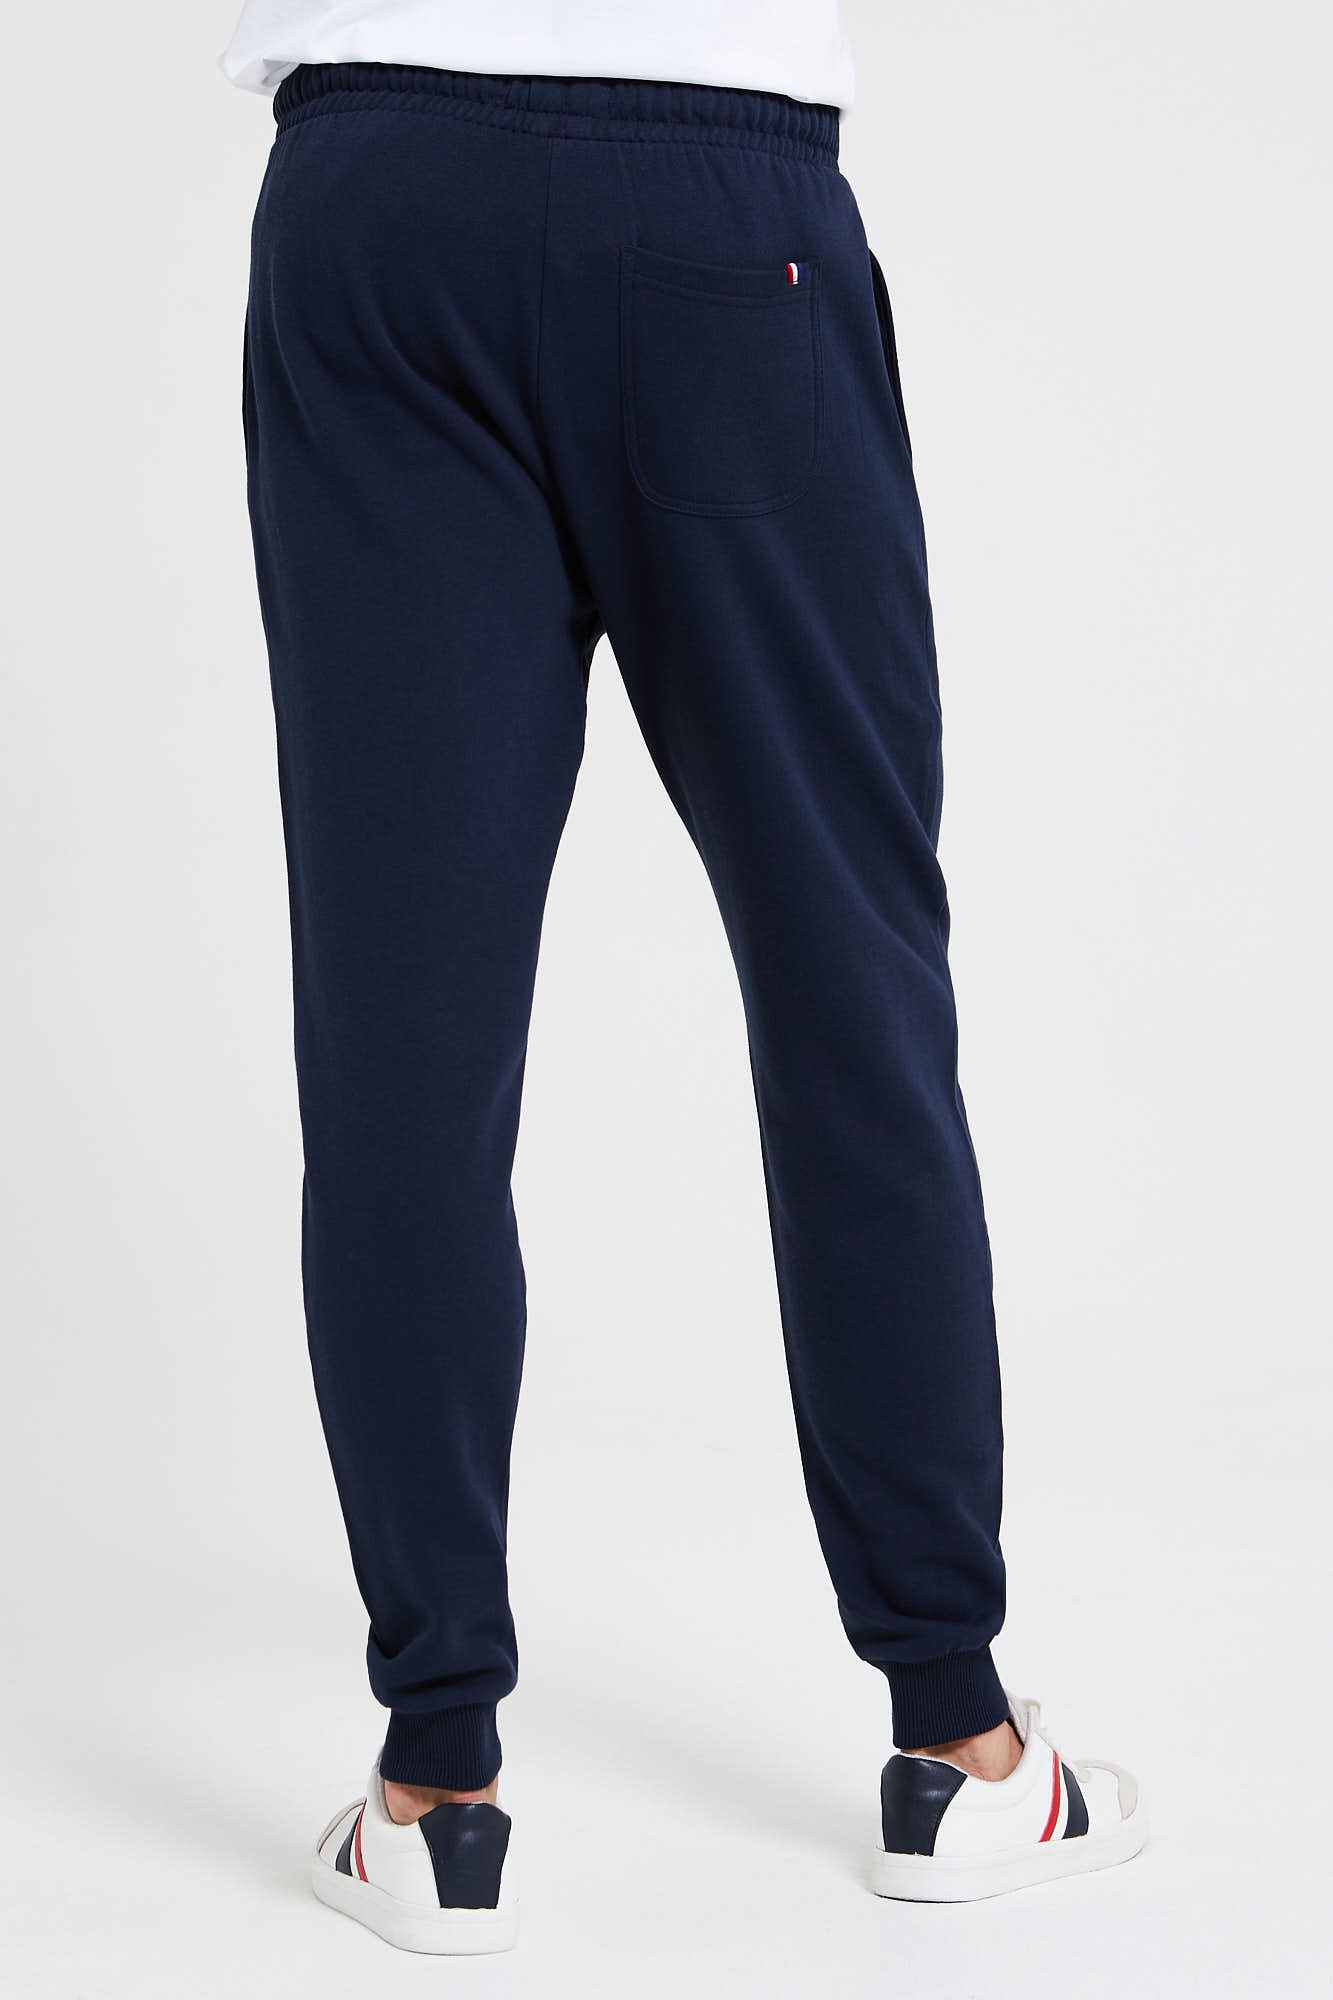 Mens Player 3 Joggers in Navy Blue – U.S. Polo Assn. UK